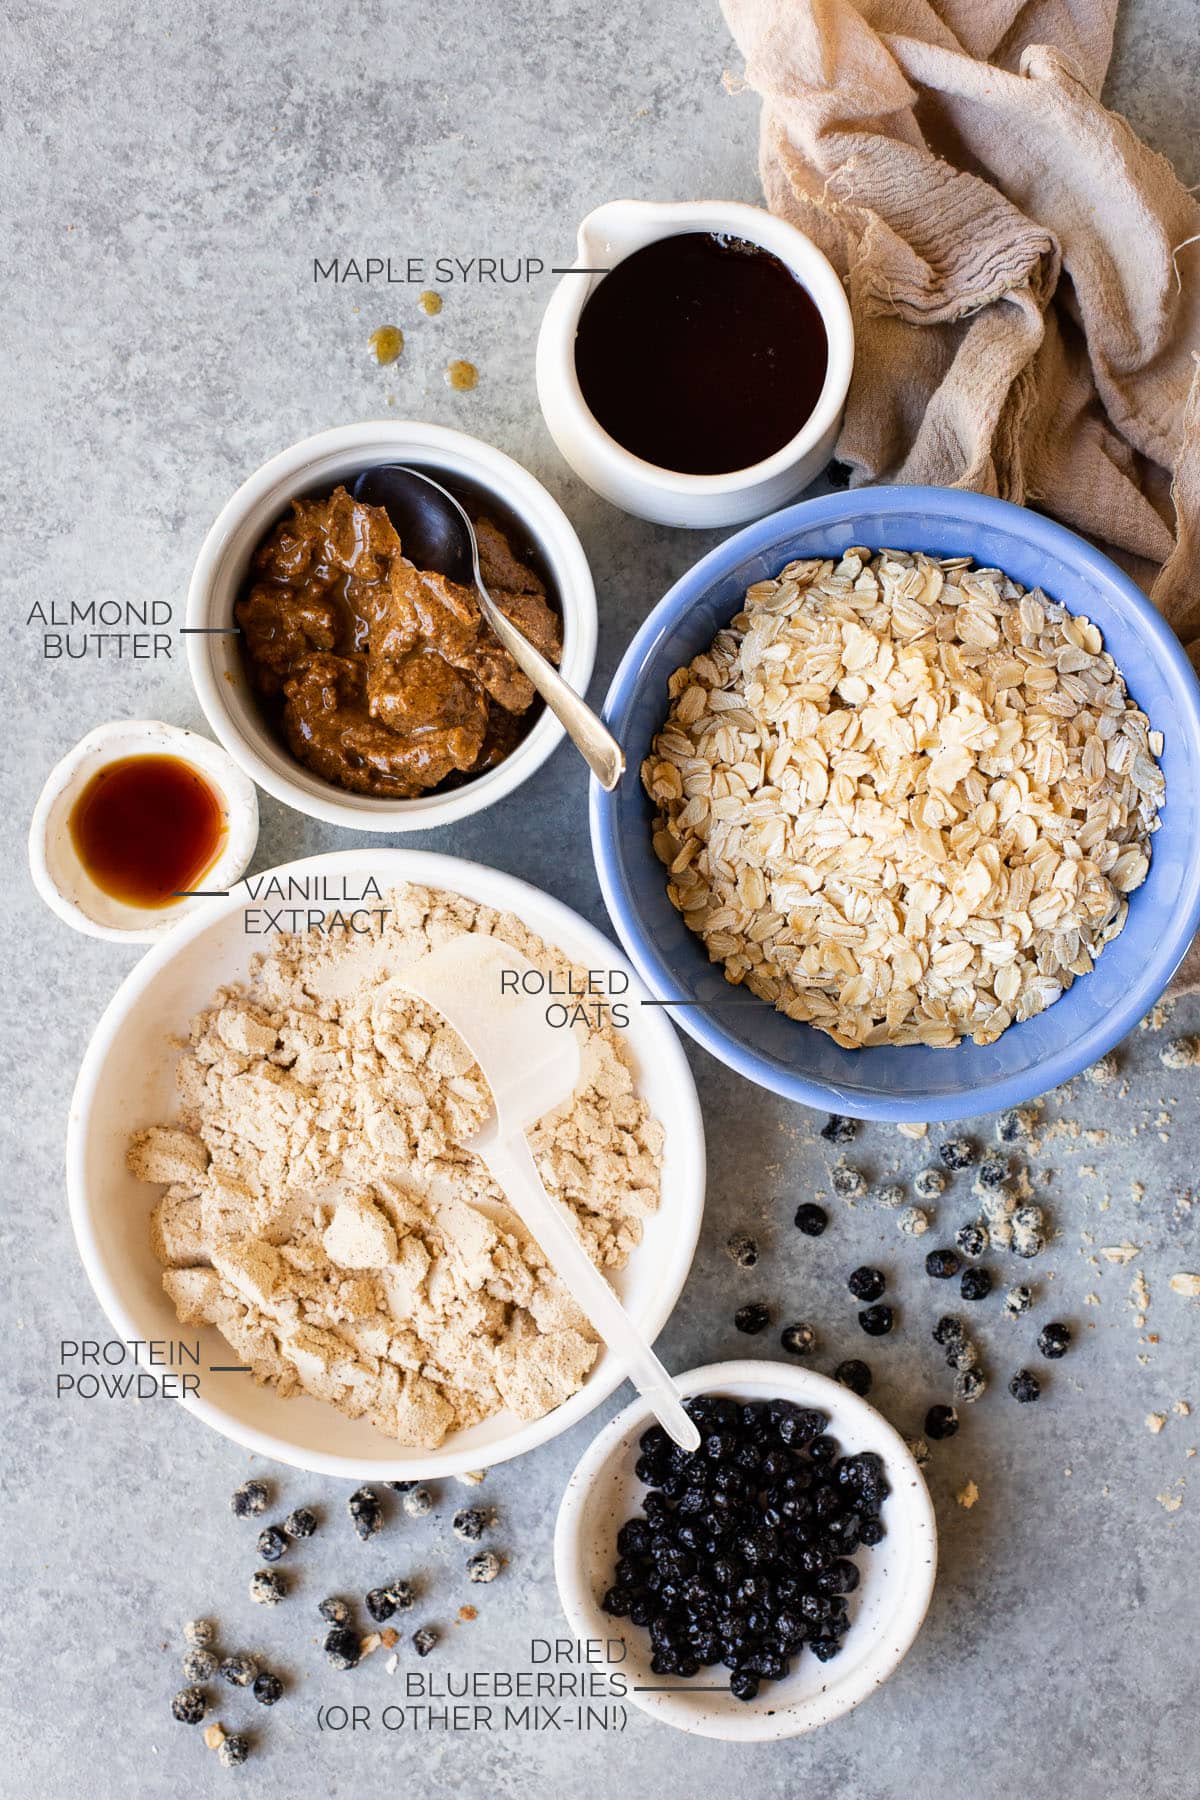 Maple syrup, almond butter, oats, protein powder, vanilla, and dried blueberries in ingredient bowls.